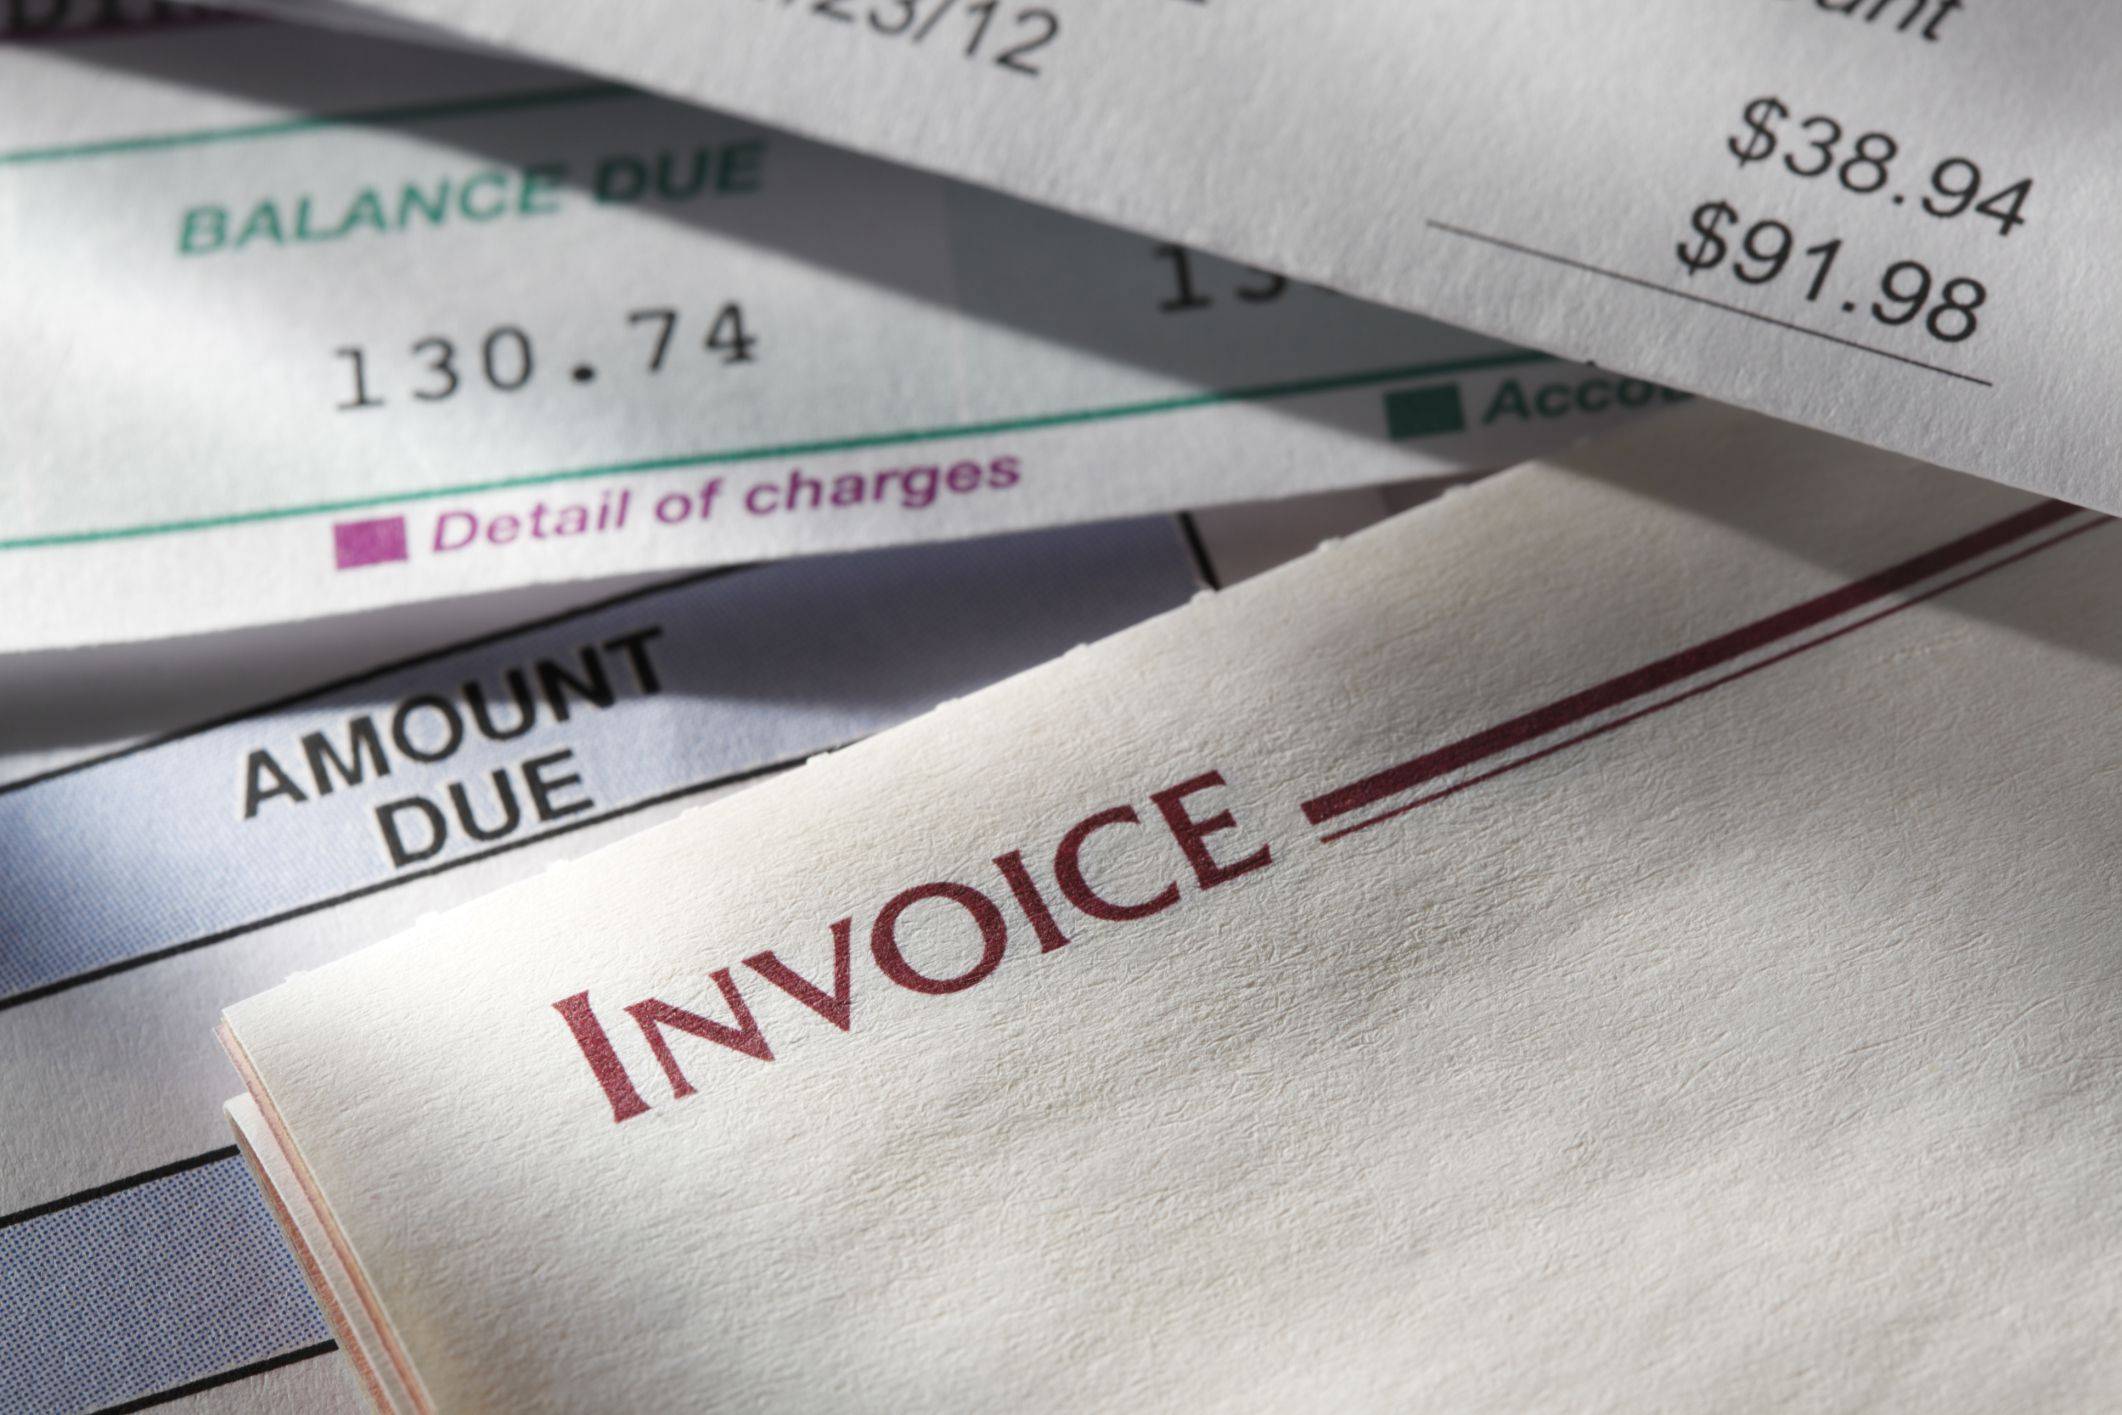 Invoicing Rules and Obligations to by respected by Companies